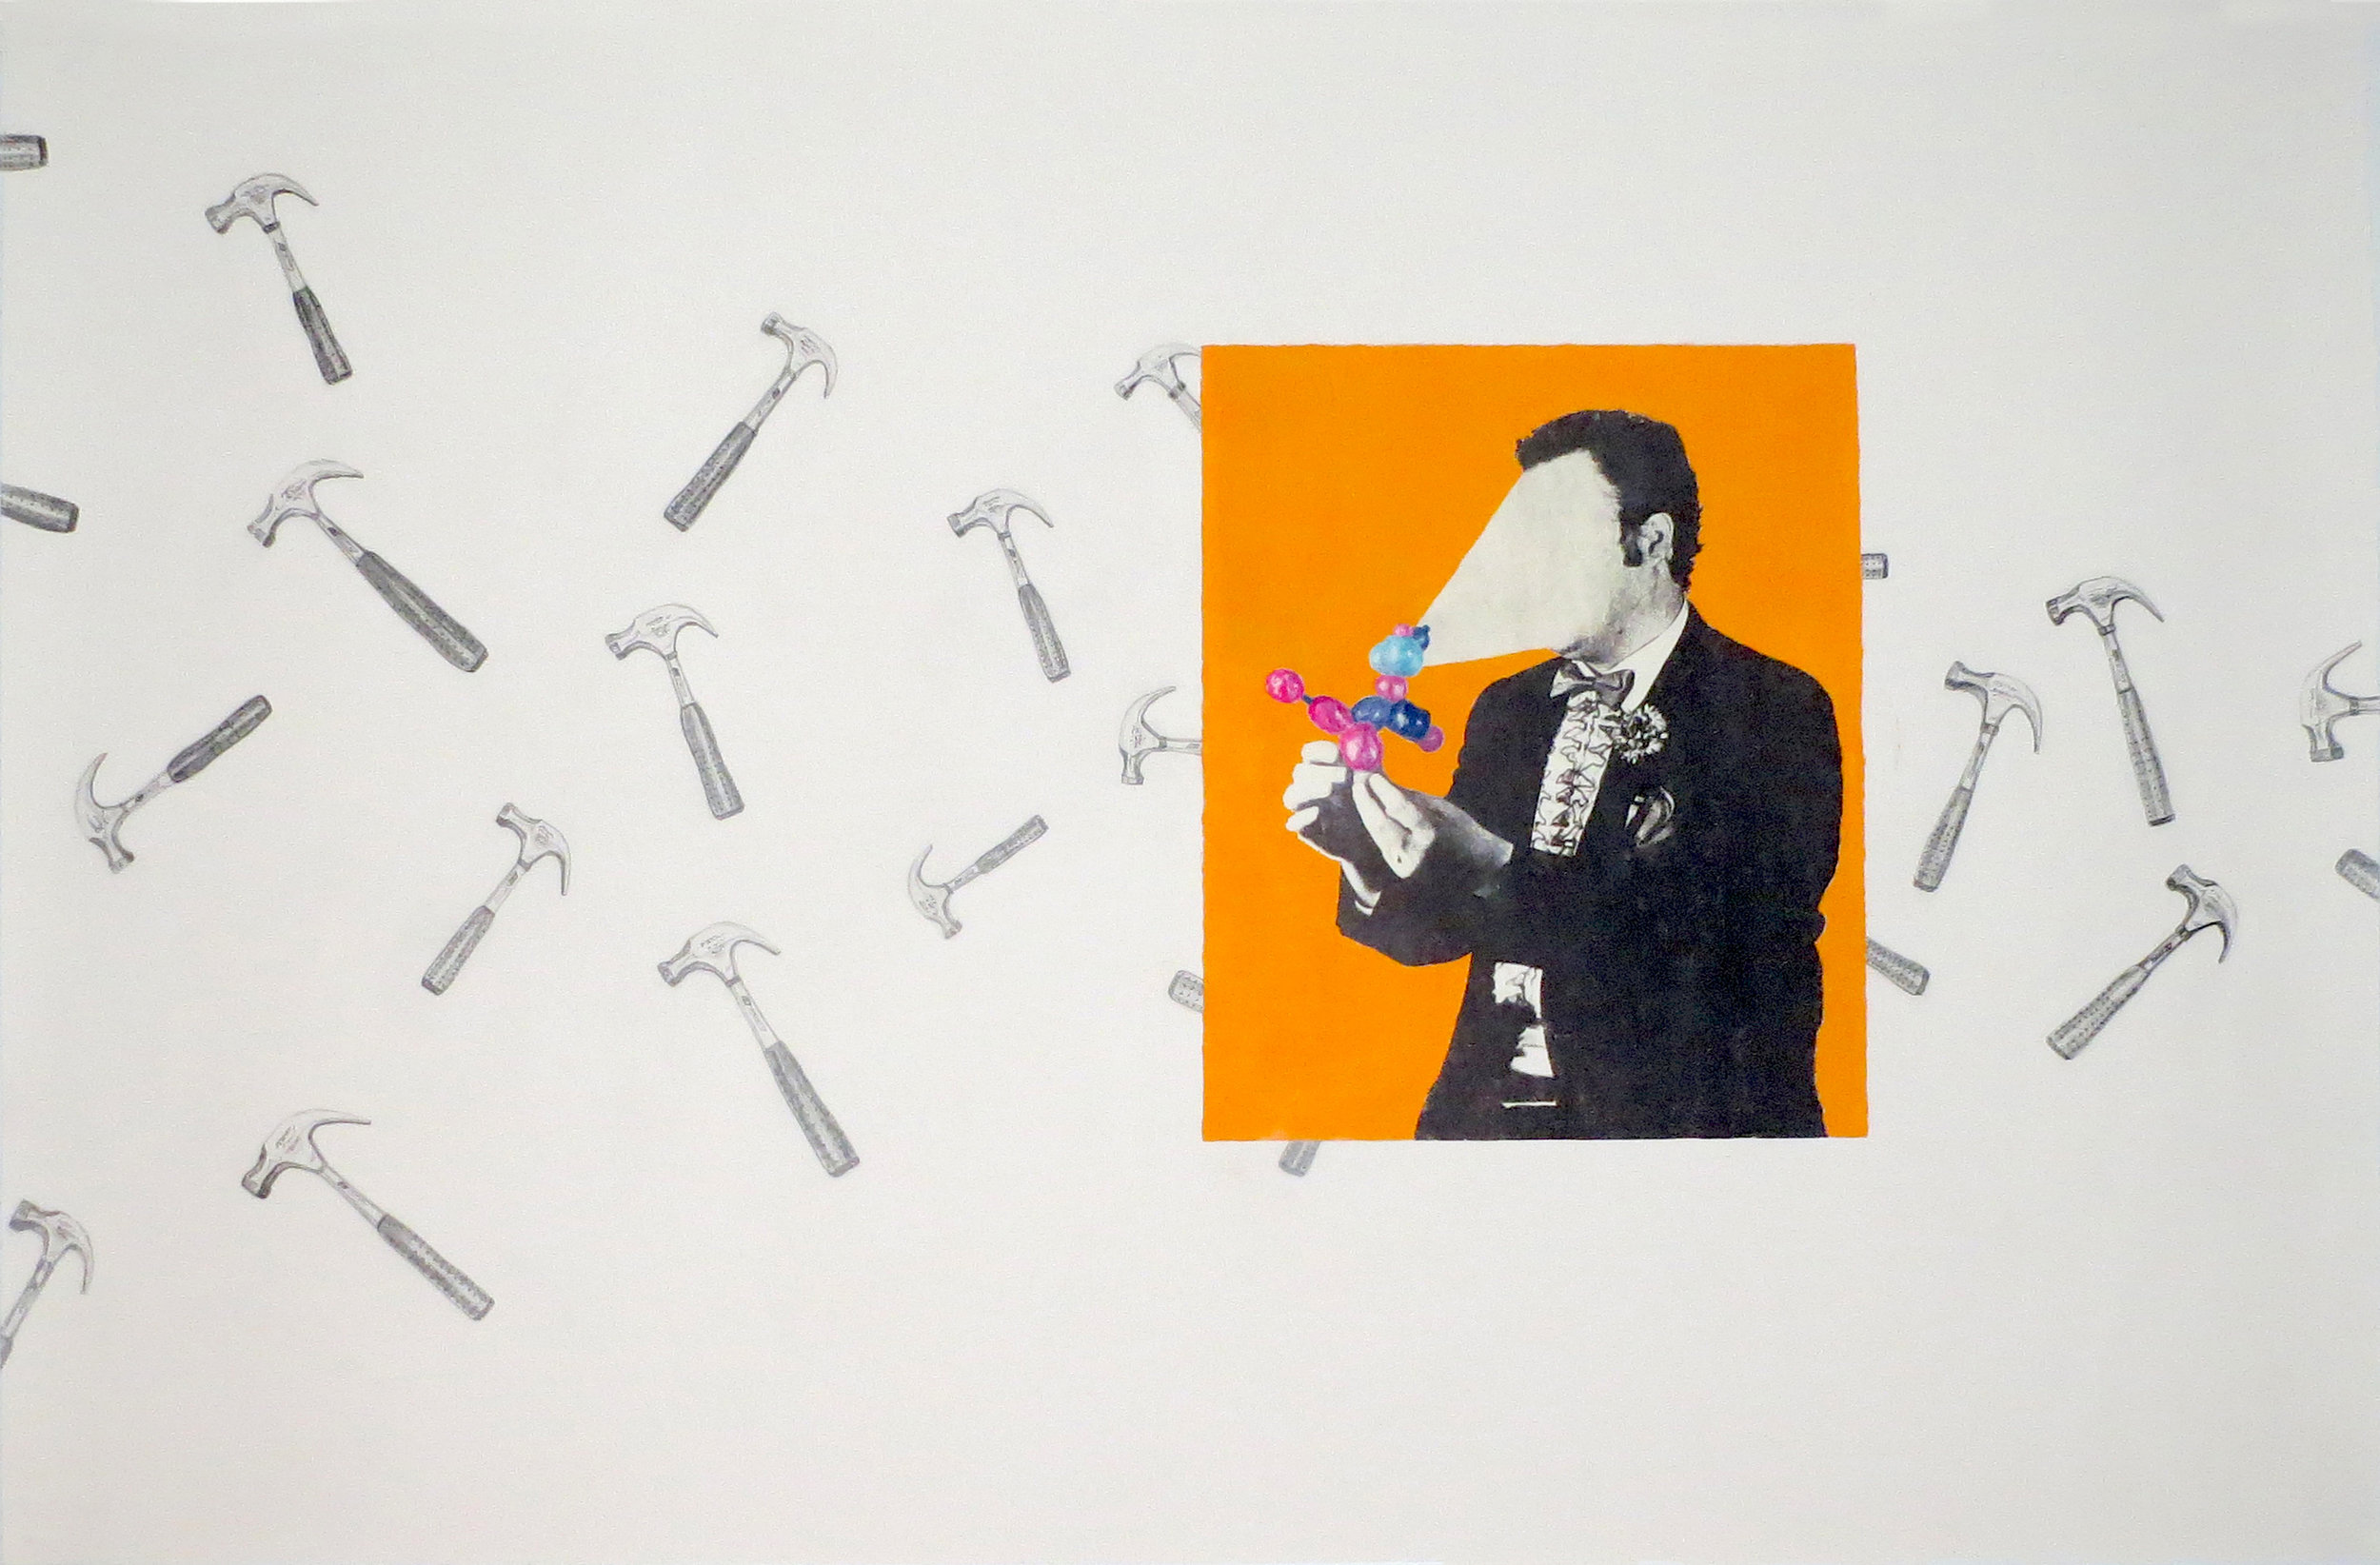  John Buron,  Bright Shiny Objects , image transfer, gouache and graphite on paper, 28” x 40” 